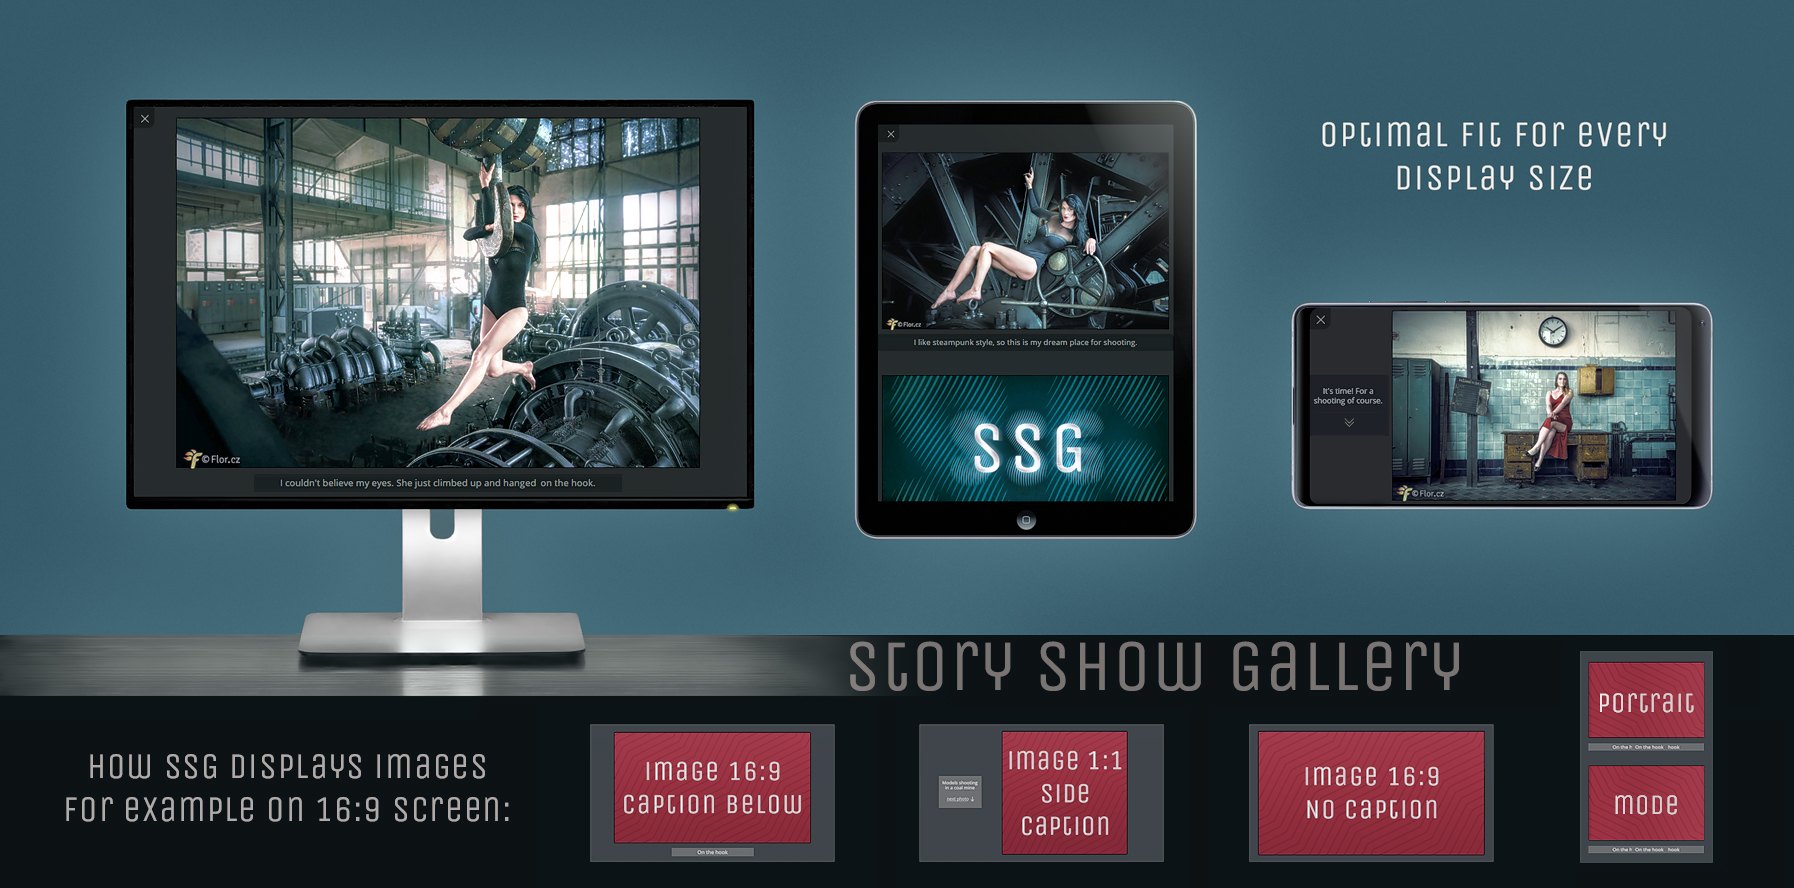 Optimal fit for every display size. SSG compares image size vs. screen size and place a caption to optimal position.